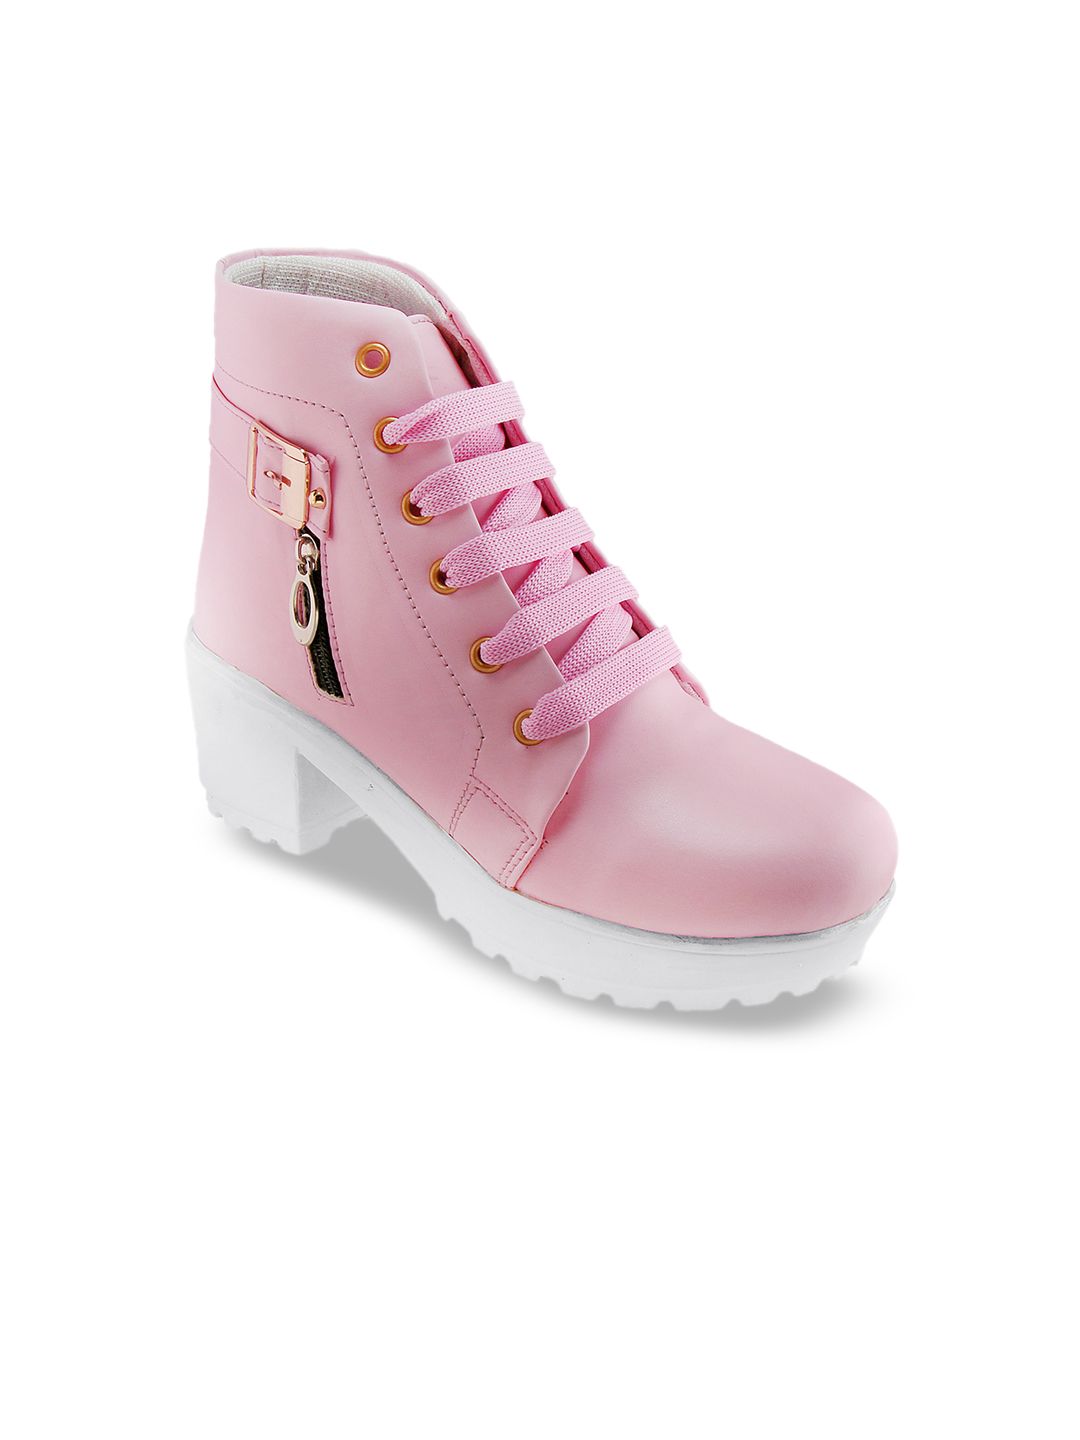 BOOTCO Women Pink & White Solid Heeled Boots Price in India